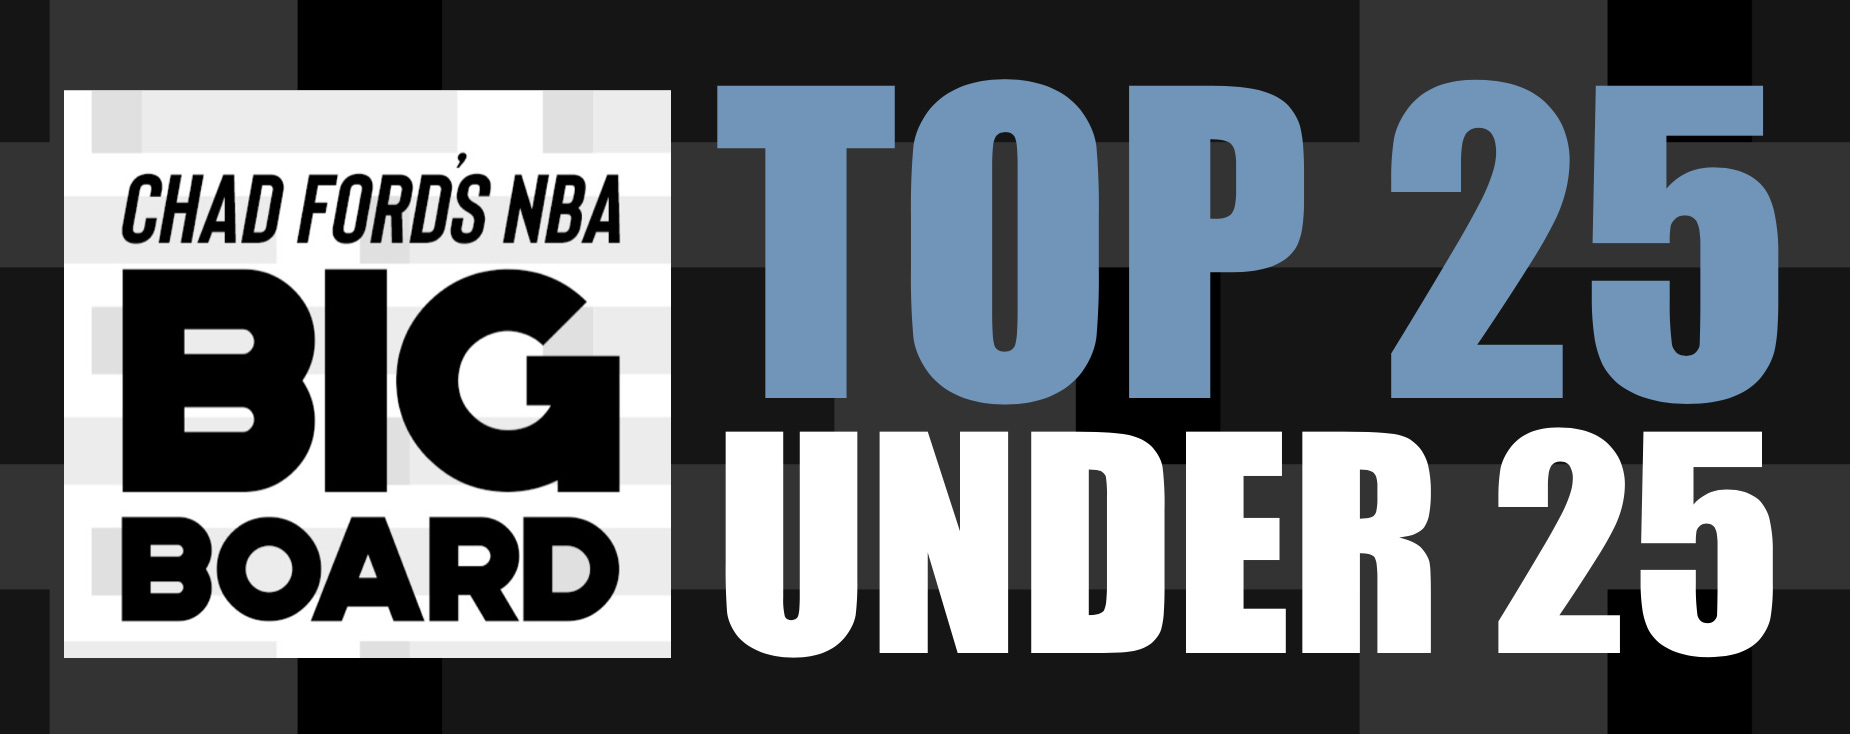 NBA rankings: The Top 25 players under 25, 2022-23 edition